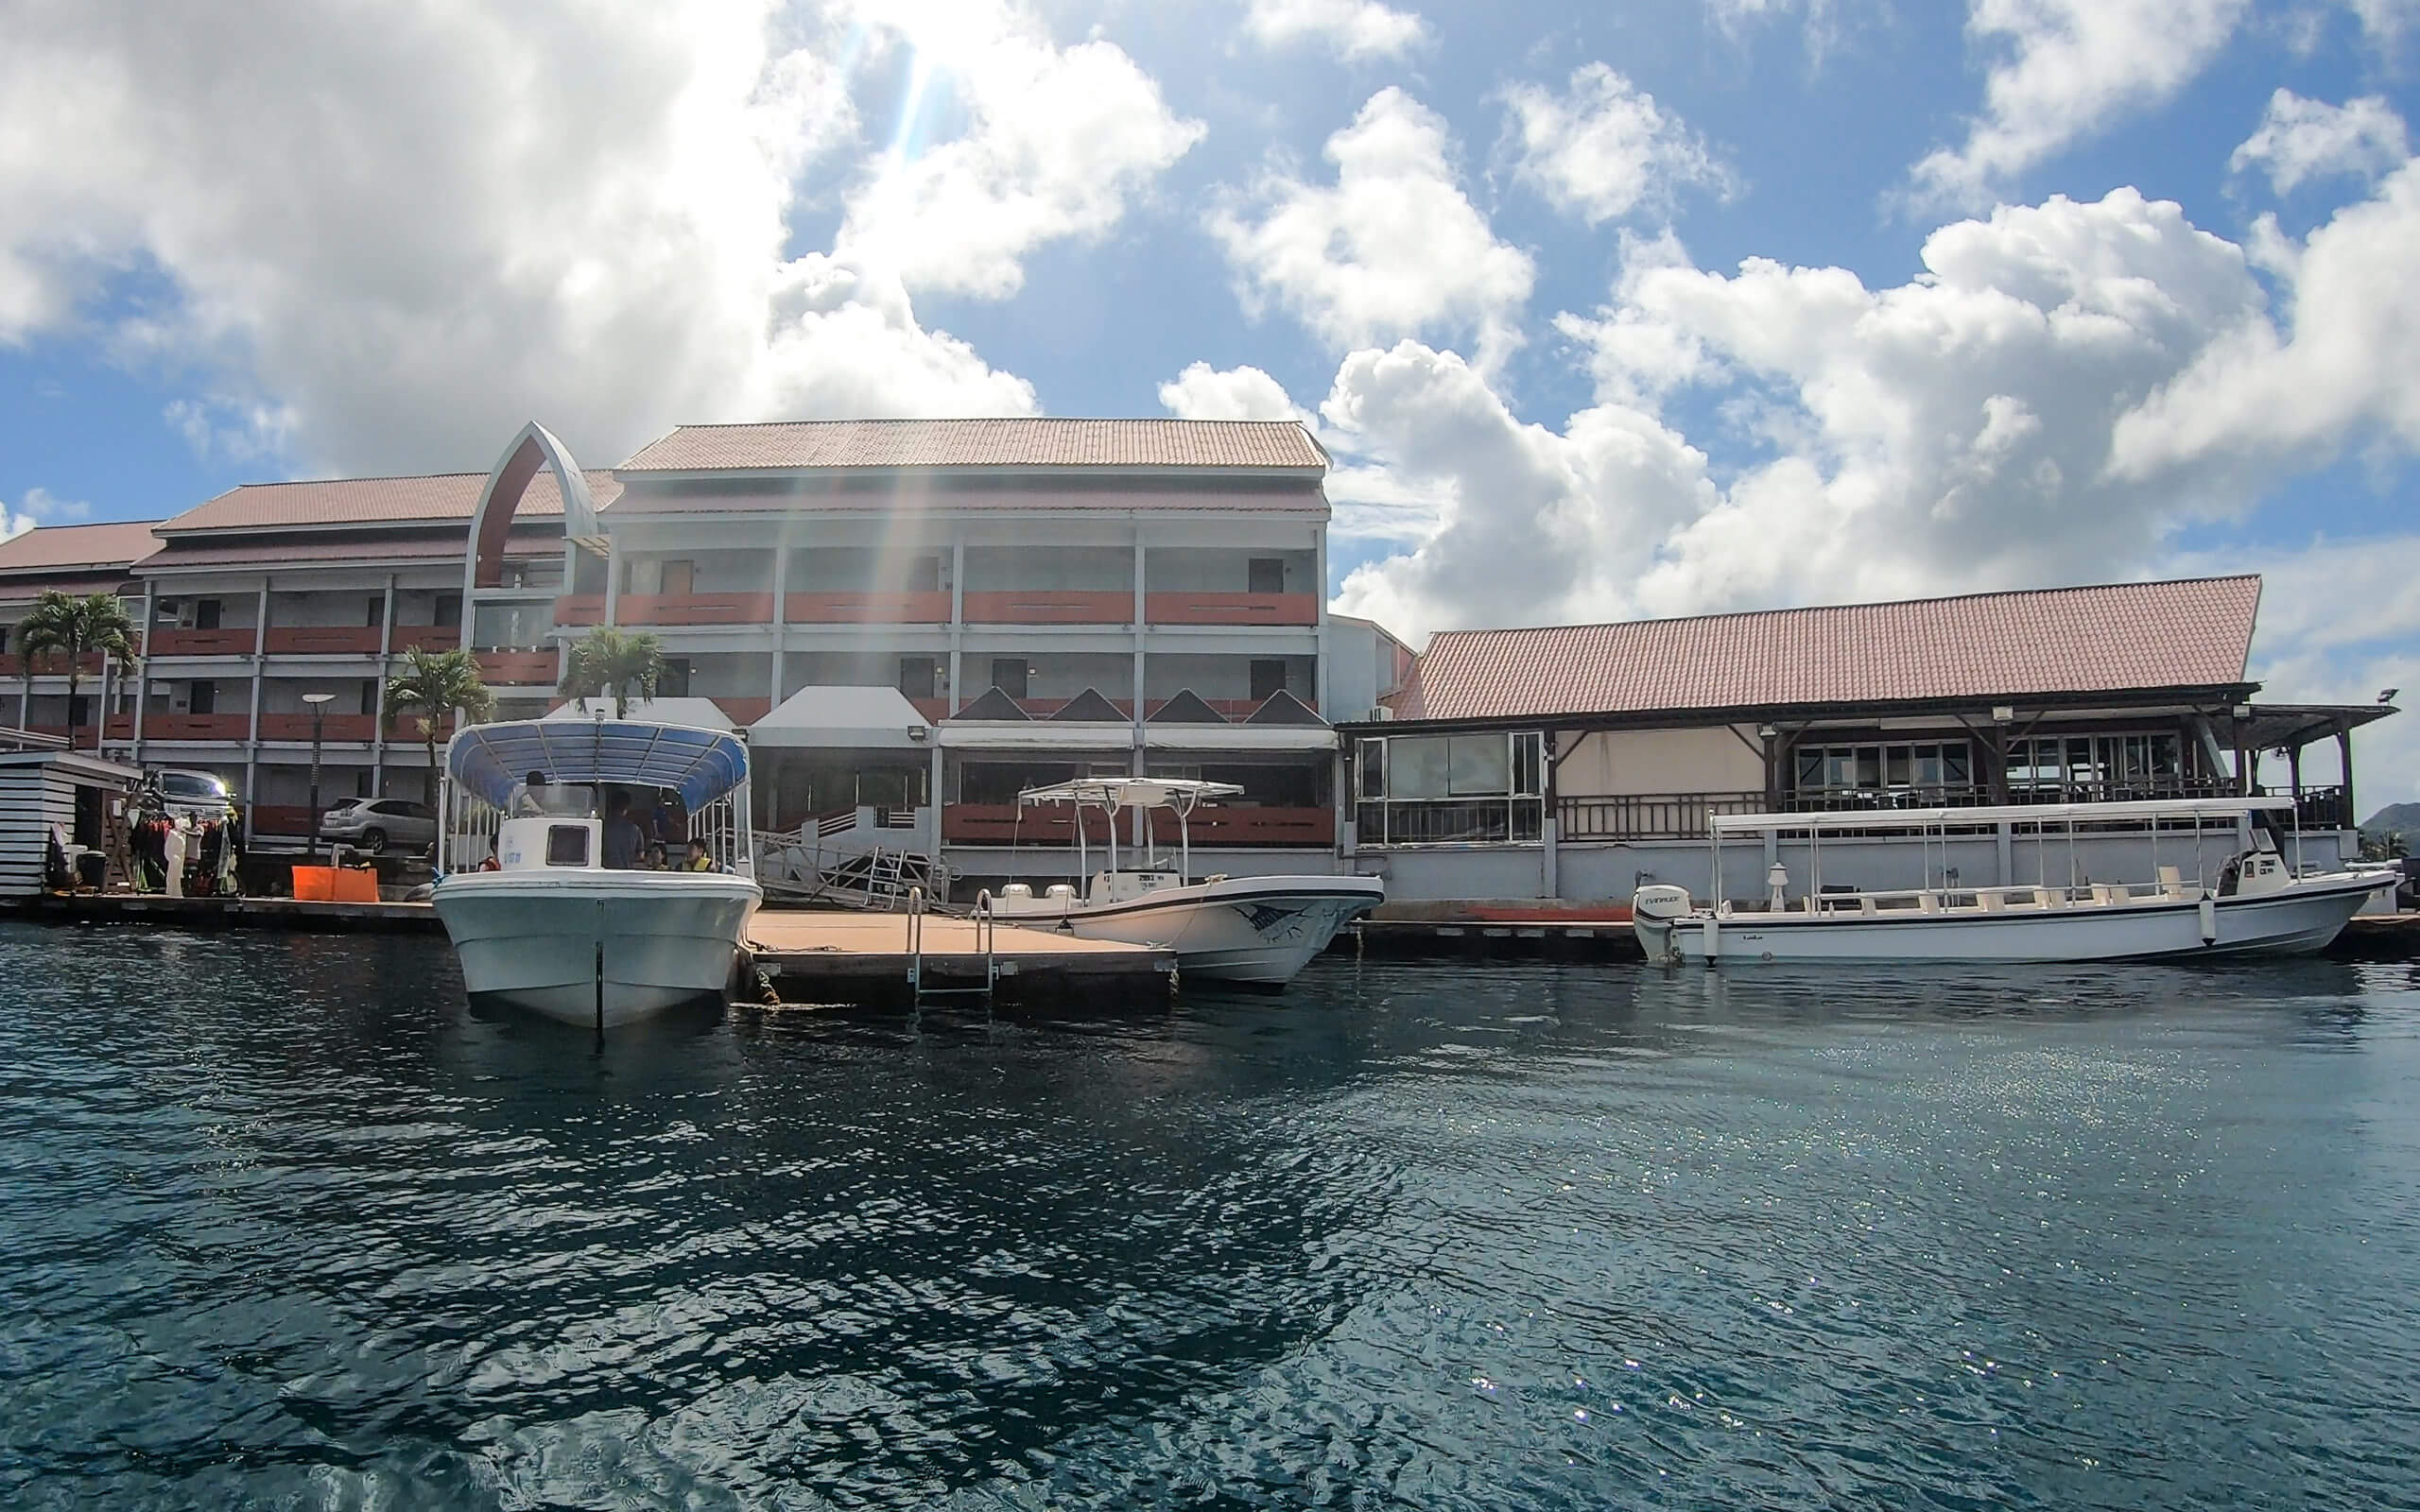 The IMPAC dock and offices